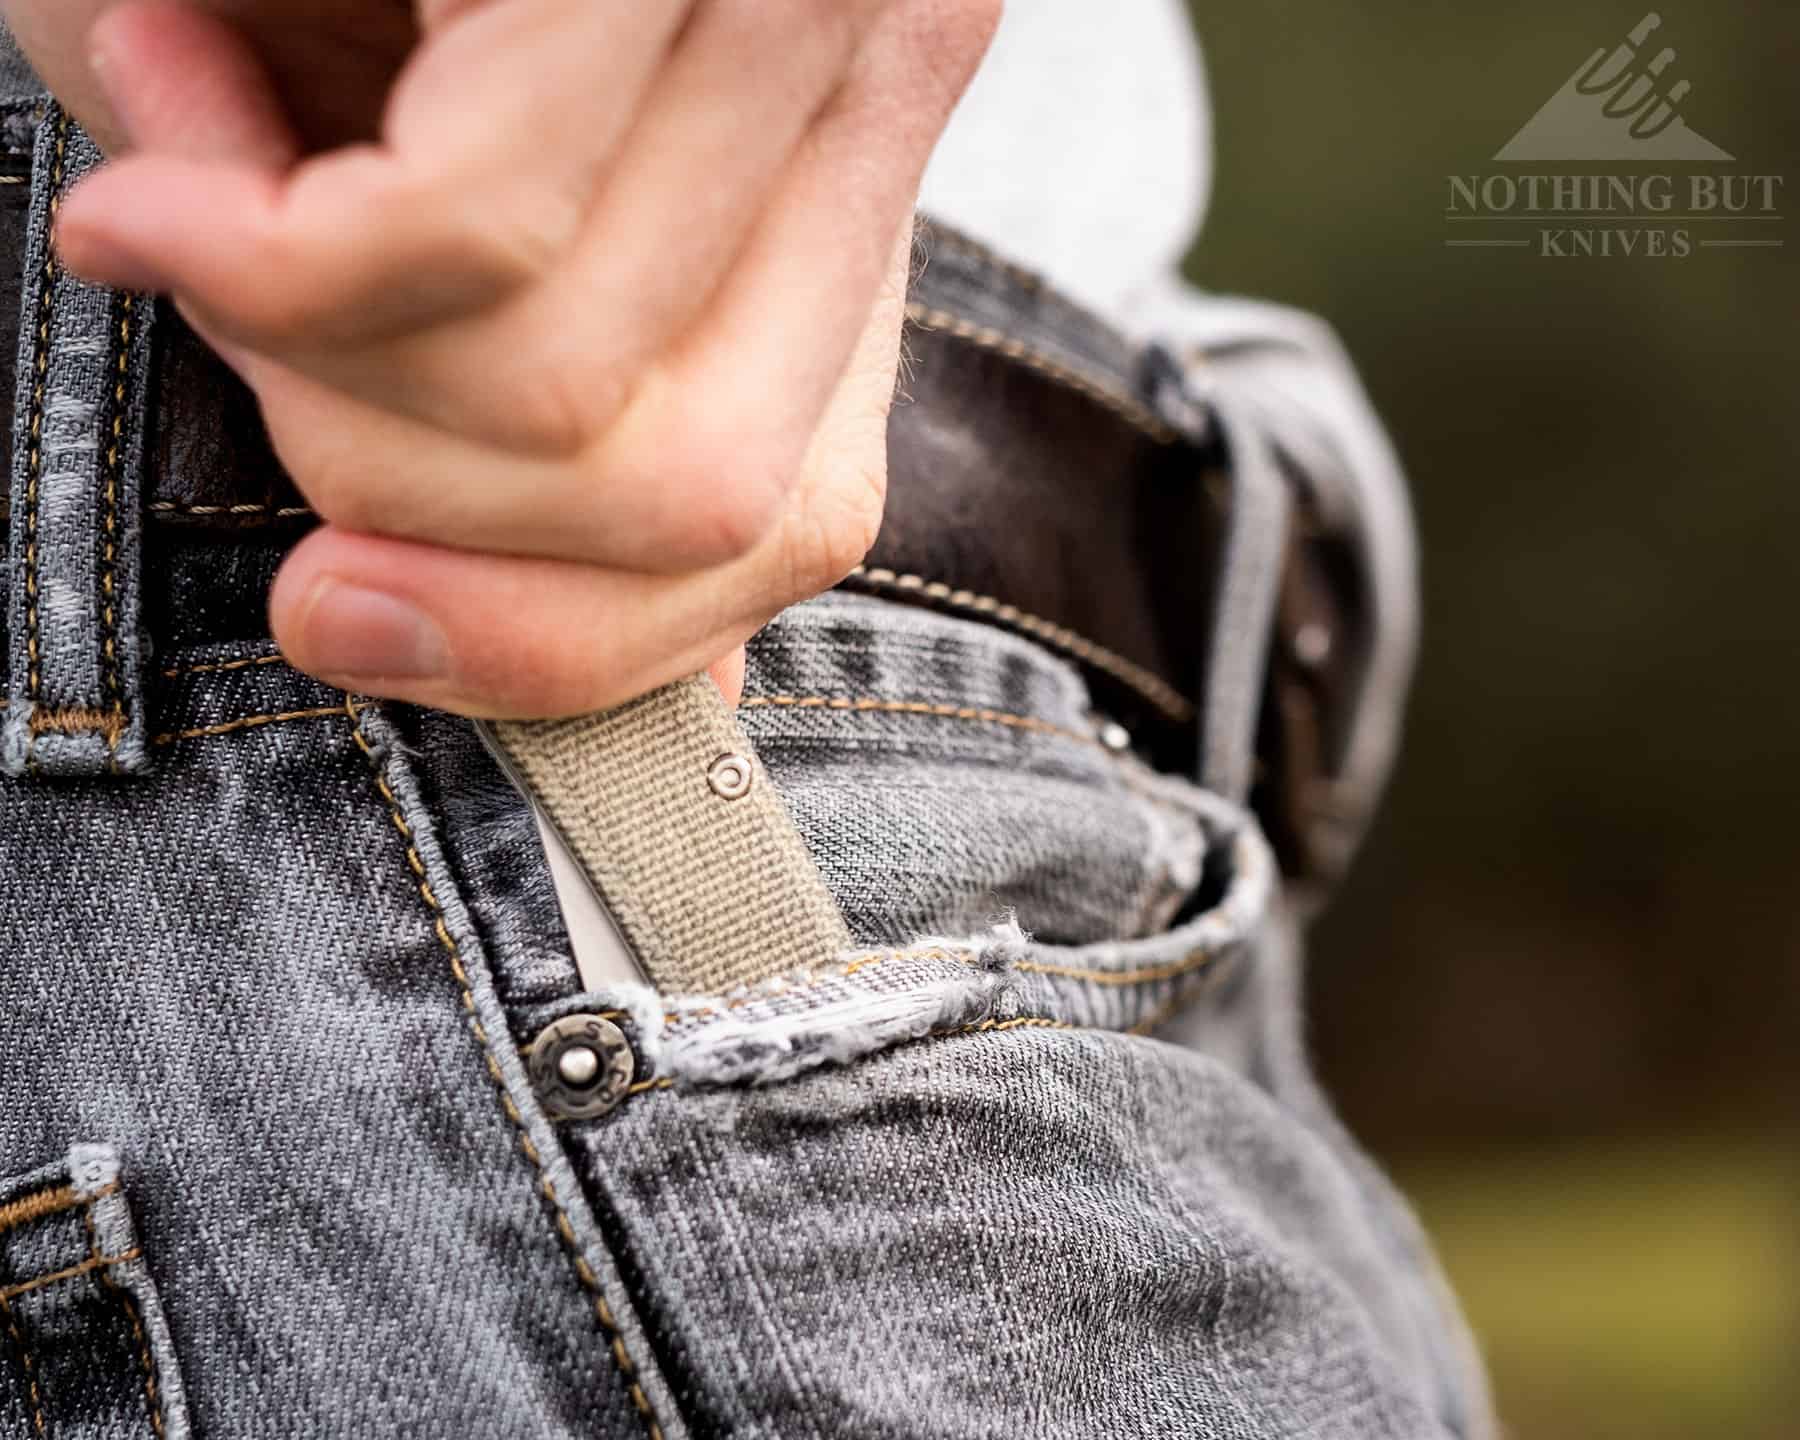 The Federalist doesn't have a pocket clip, but it is thin enough to ride comfortably in the pocket. It is also easy to remove quickly. 